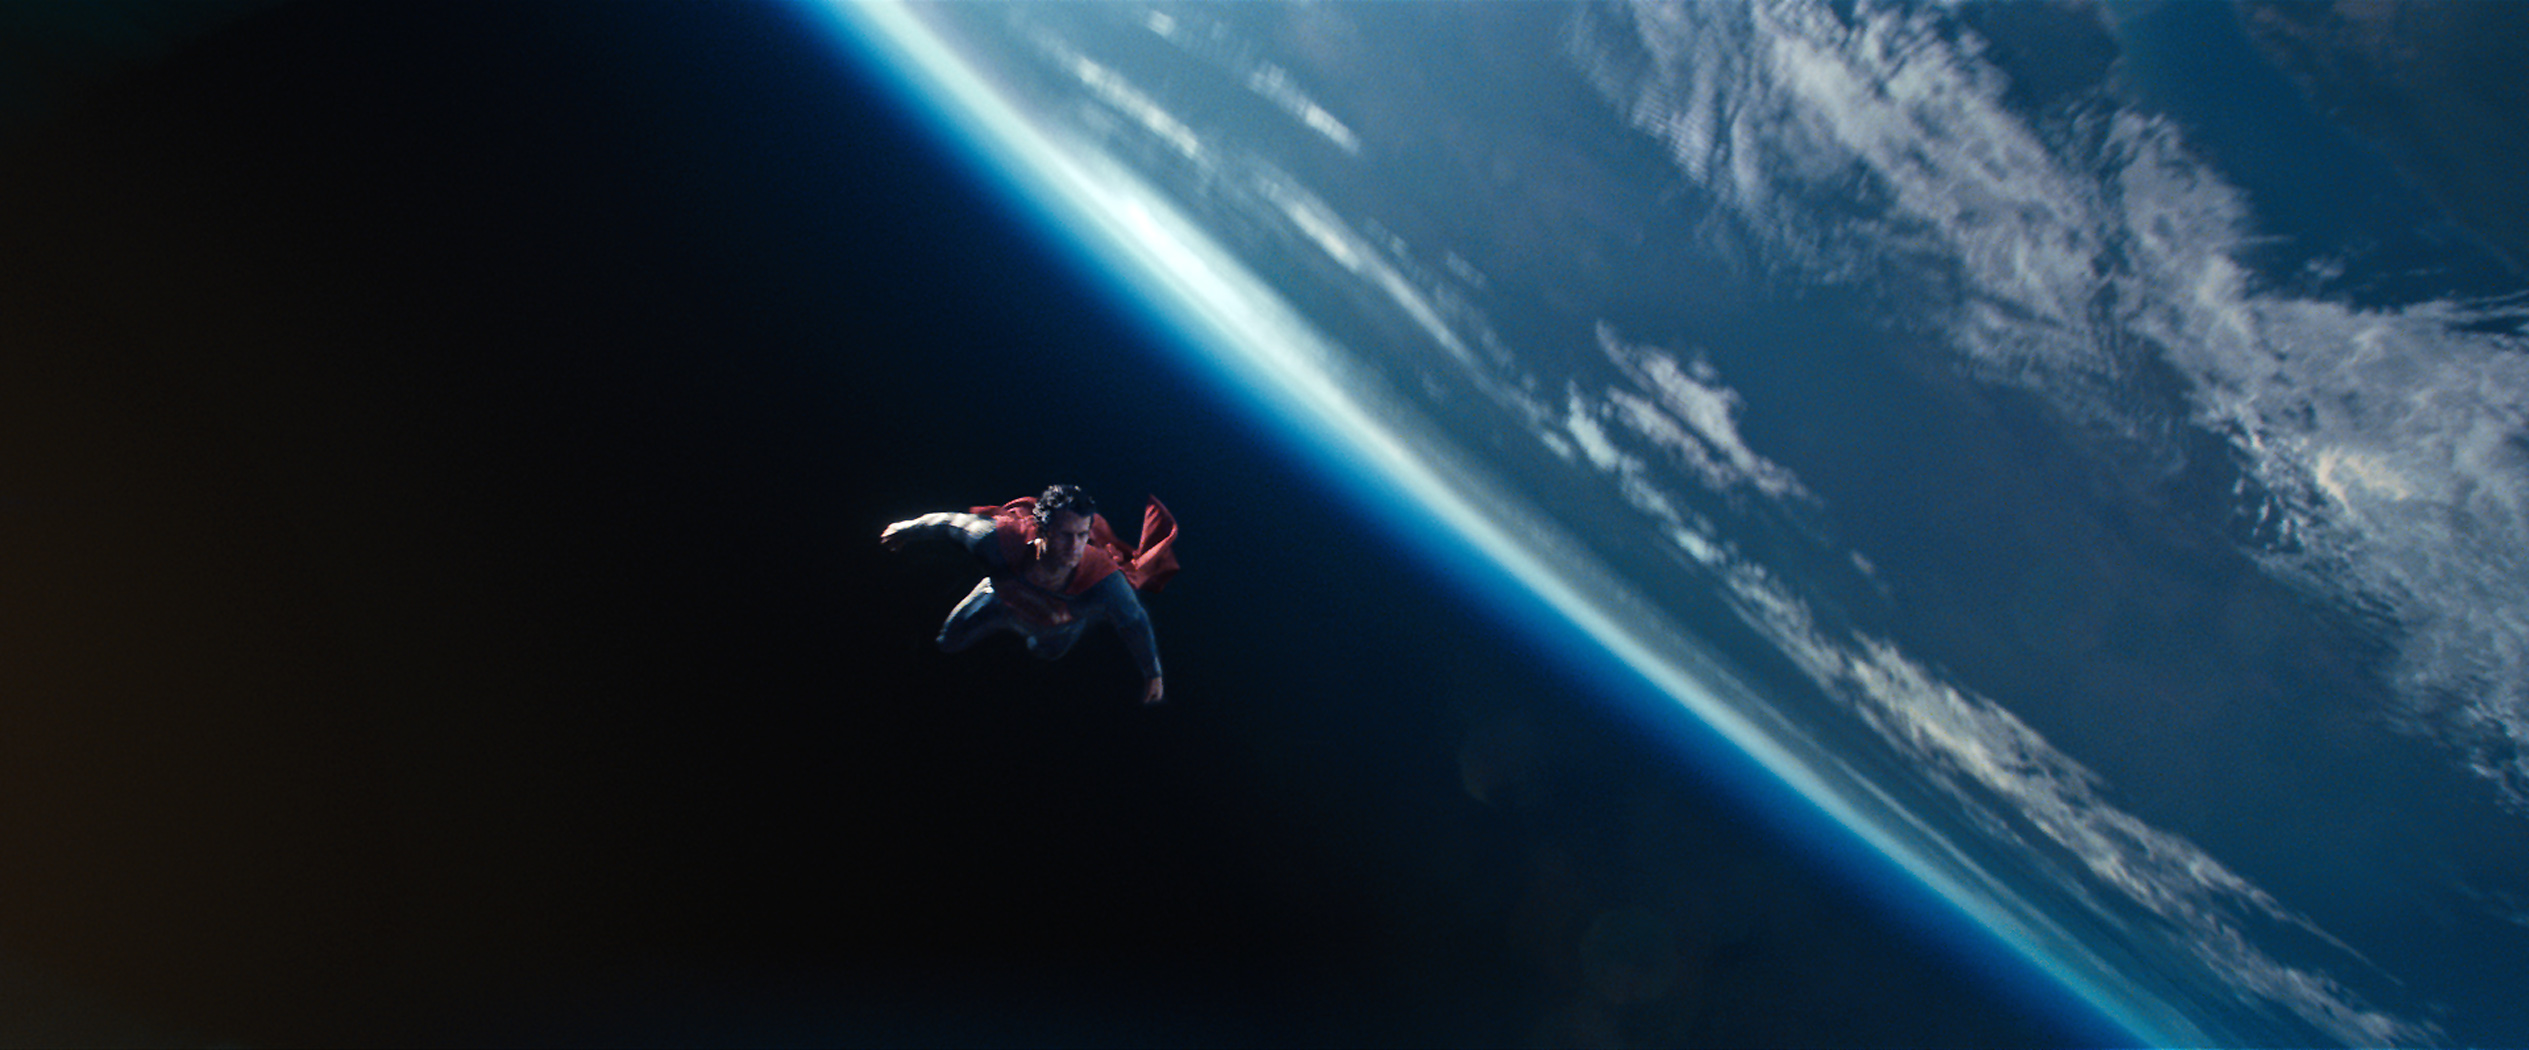 Man Of Steel: Worth It Just For The Super-Powered Combat